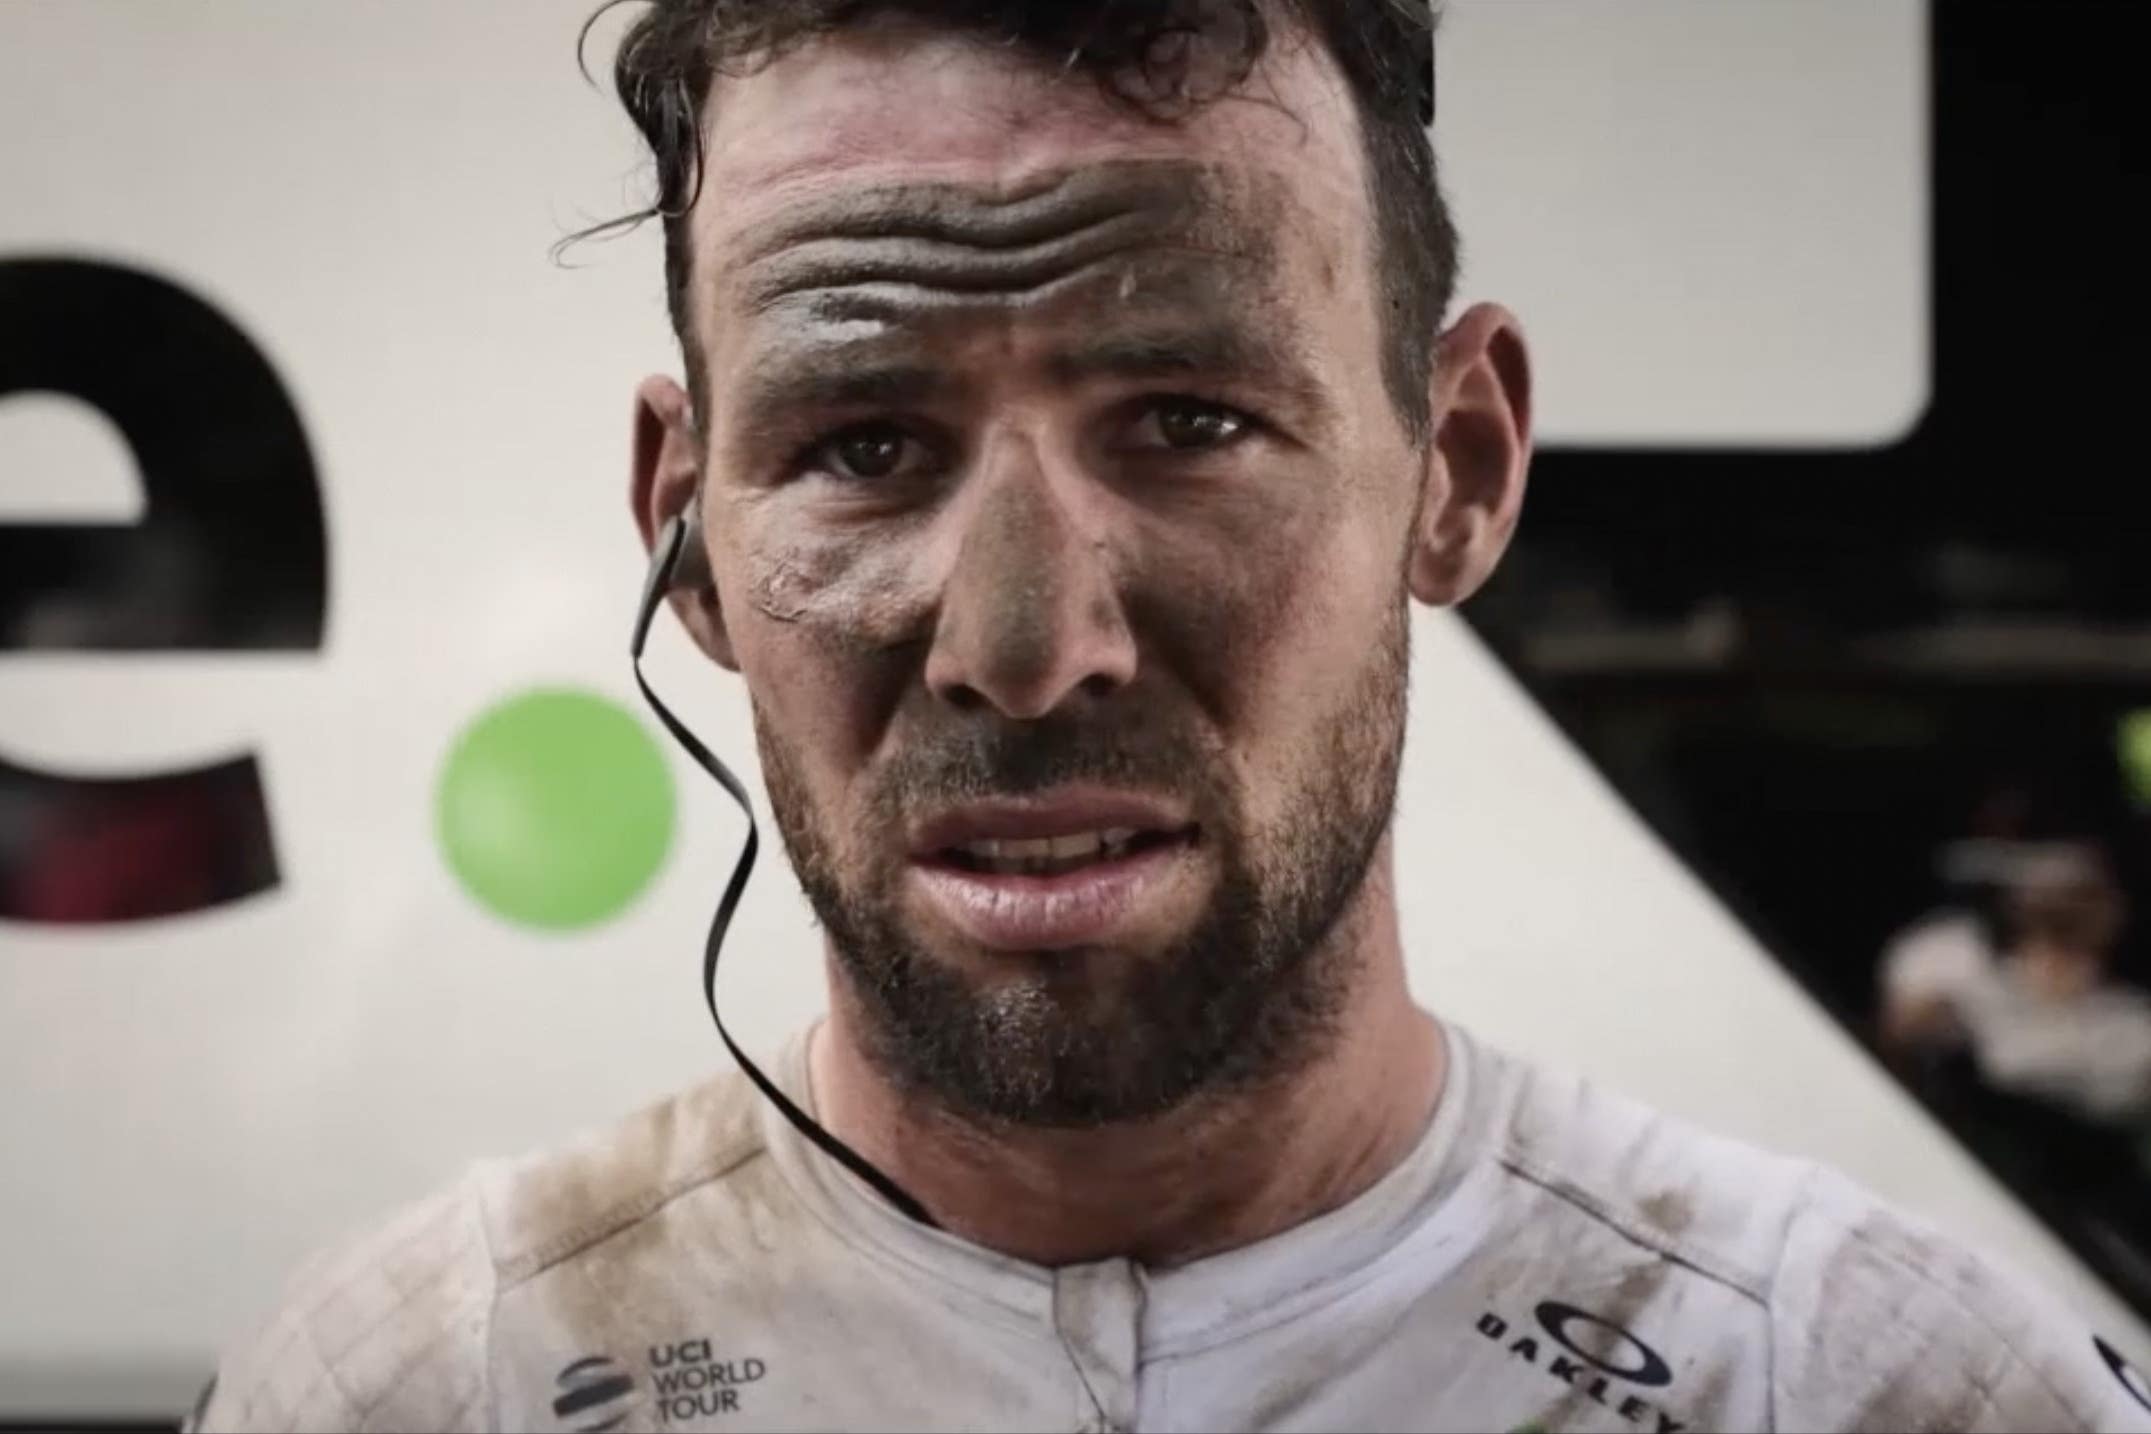 Mark Cavendish reveals depths of depression in new documentary